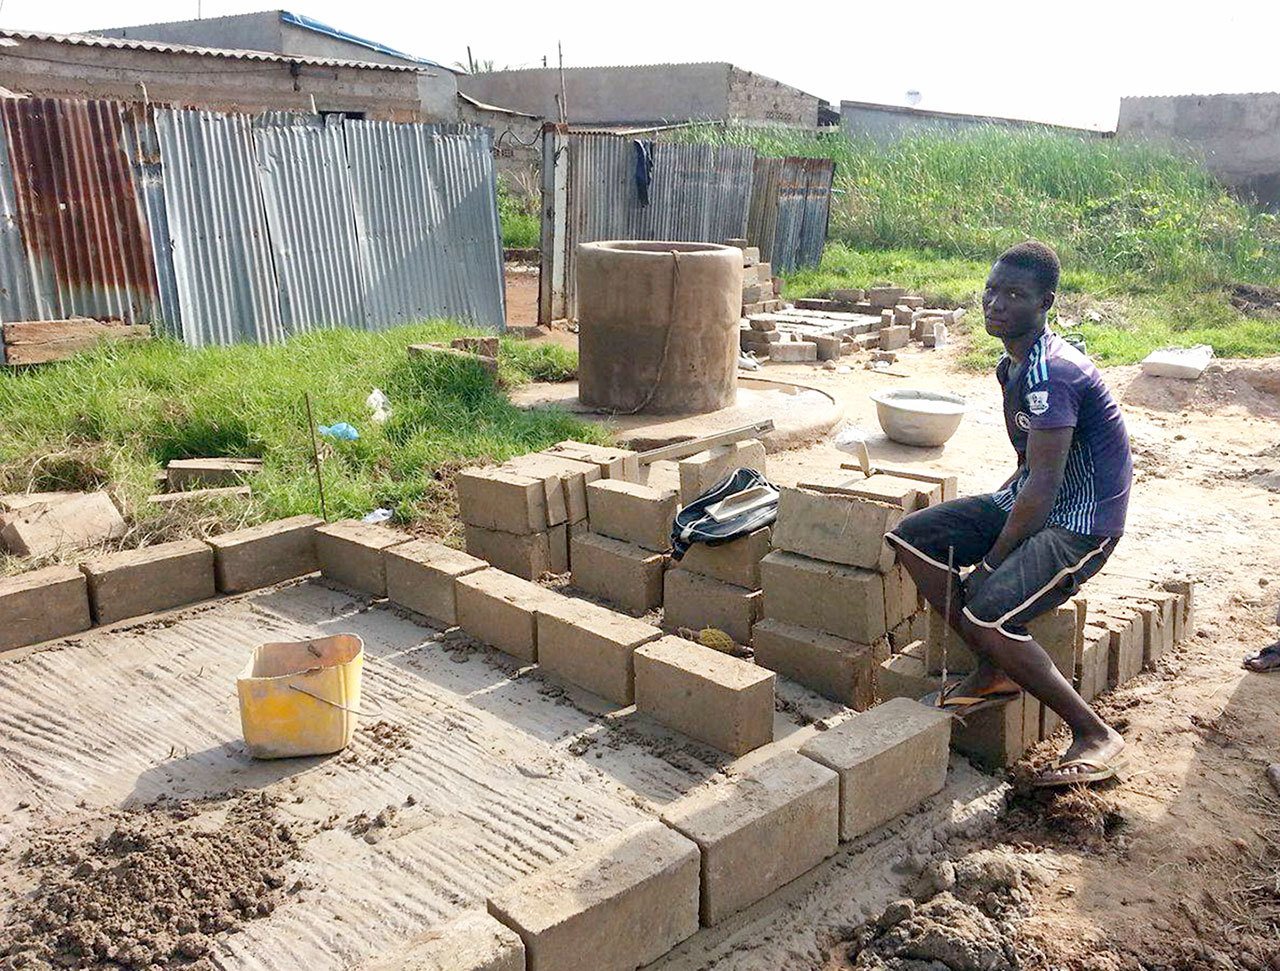 An unidentified man takes a break while working on a compost toilet for a family living in the village of Zogbedgi, Togo. Eight compost toilets have been built in the past two years, with plans to build 10 more. (Bedi Taouvik Boukari)